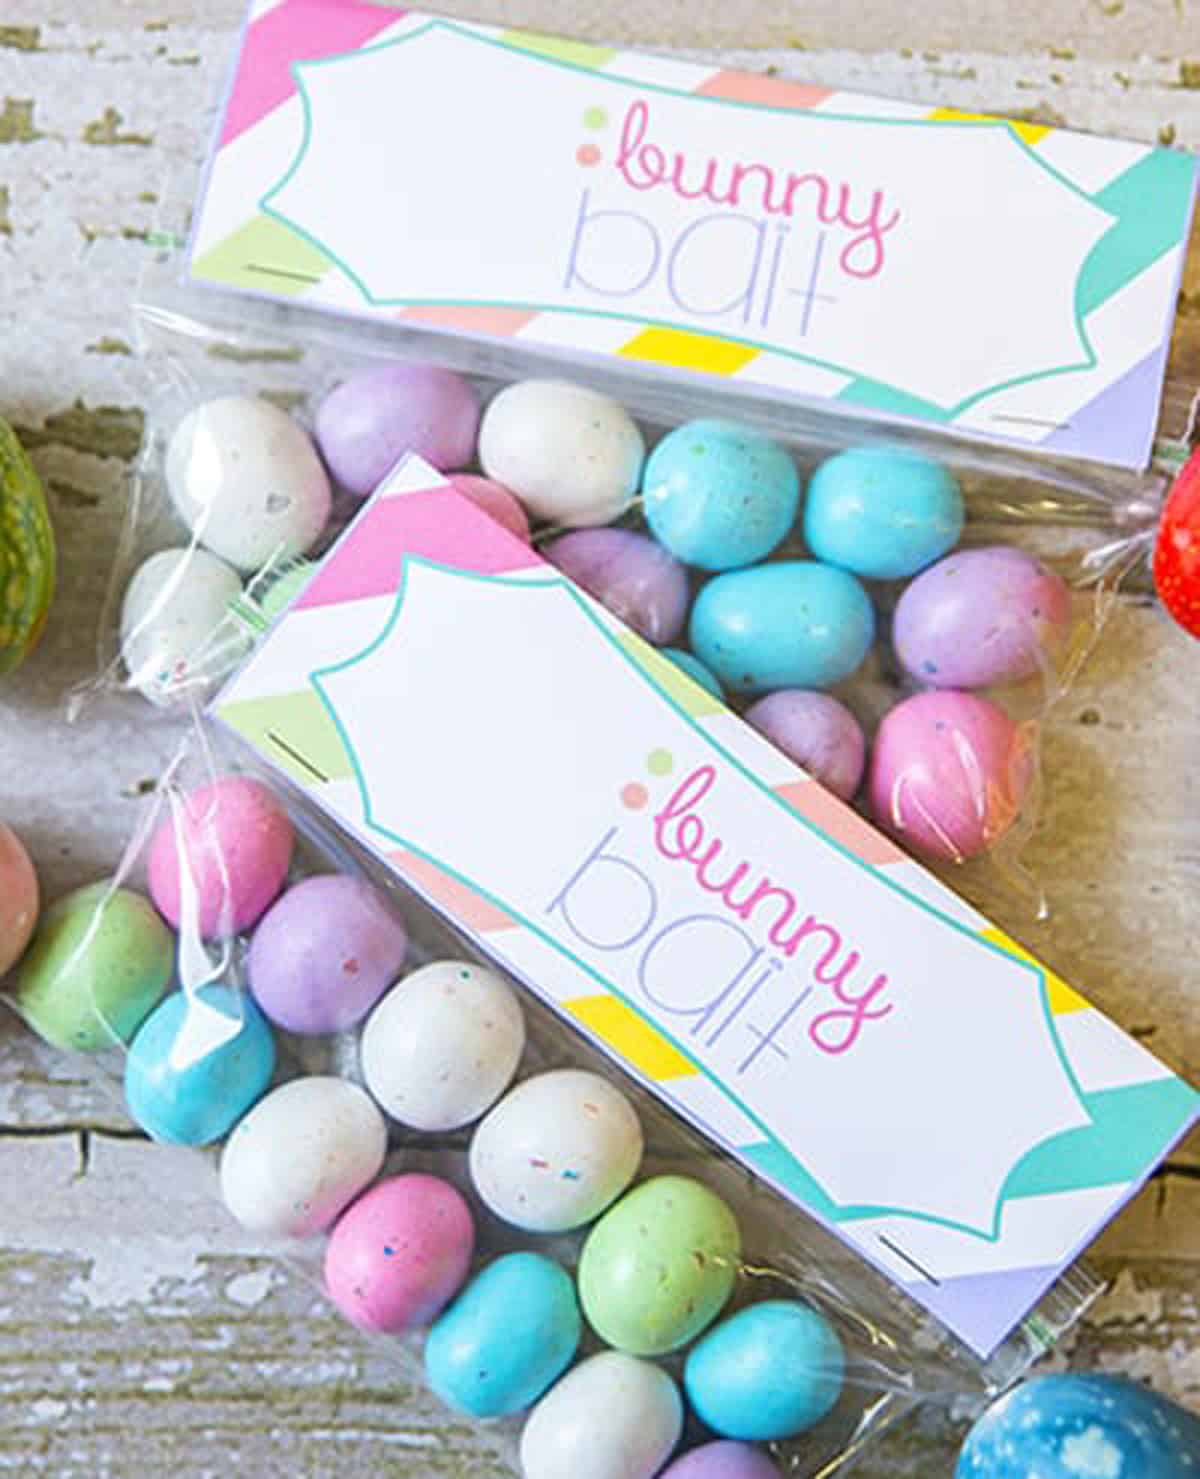 Two bags of Easter candy with "bunny bait" gift tags attached. 